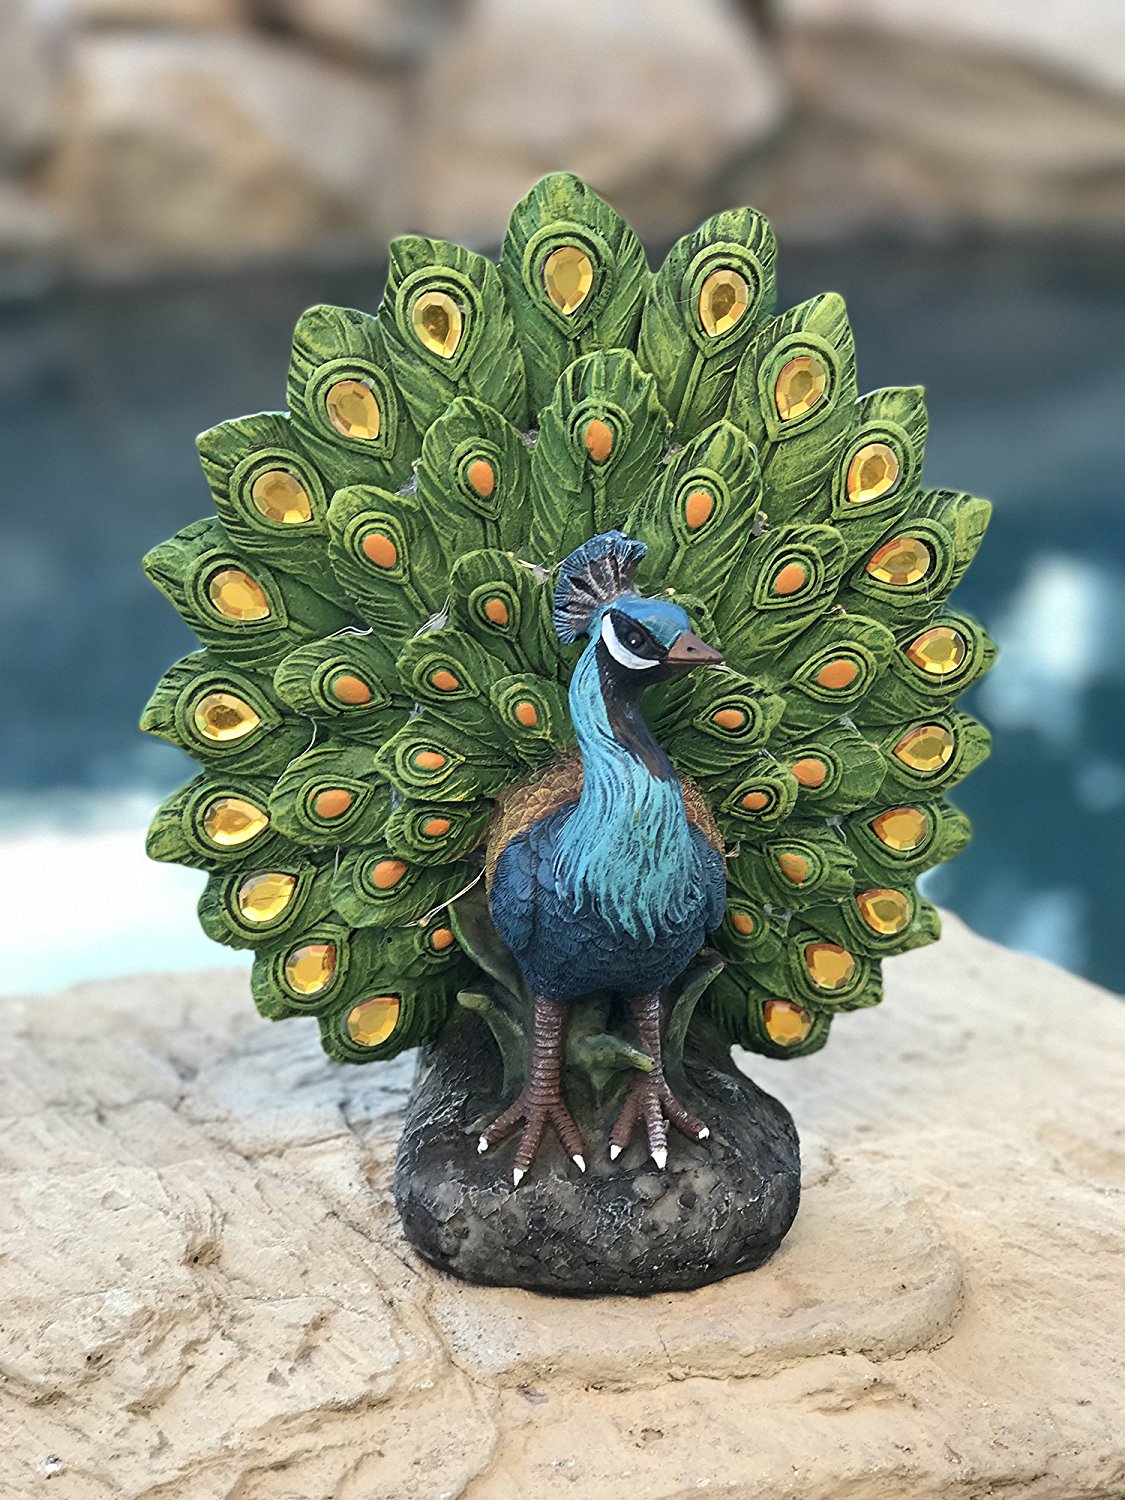 Majestic Peacock Dance Opening Feathers LED Lighted Decorative Indoor Outdoor Statue 12 Inch